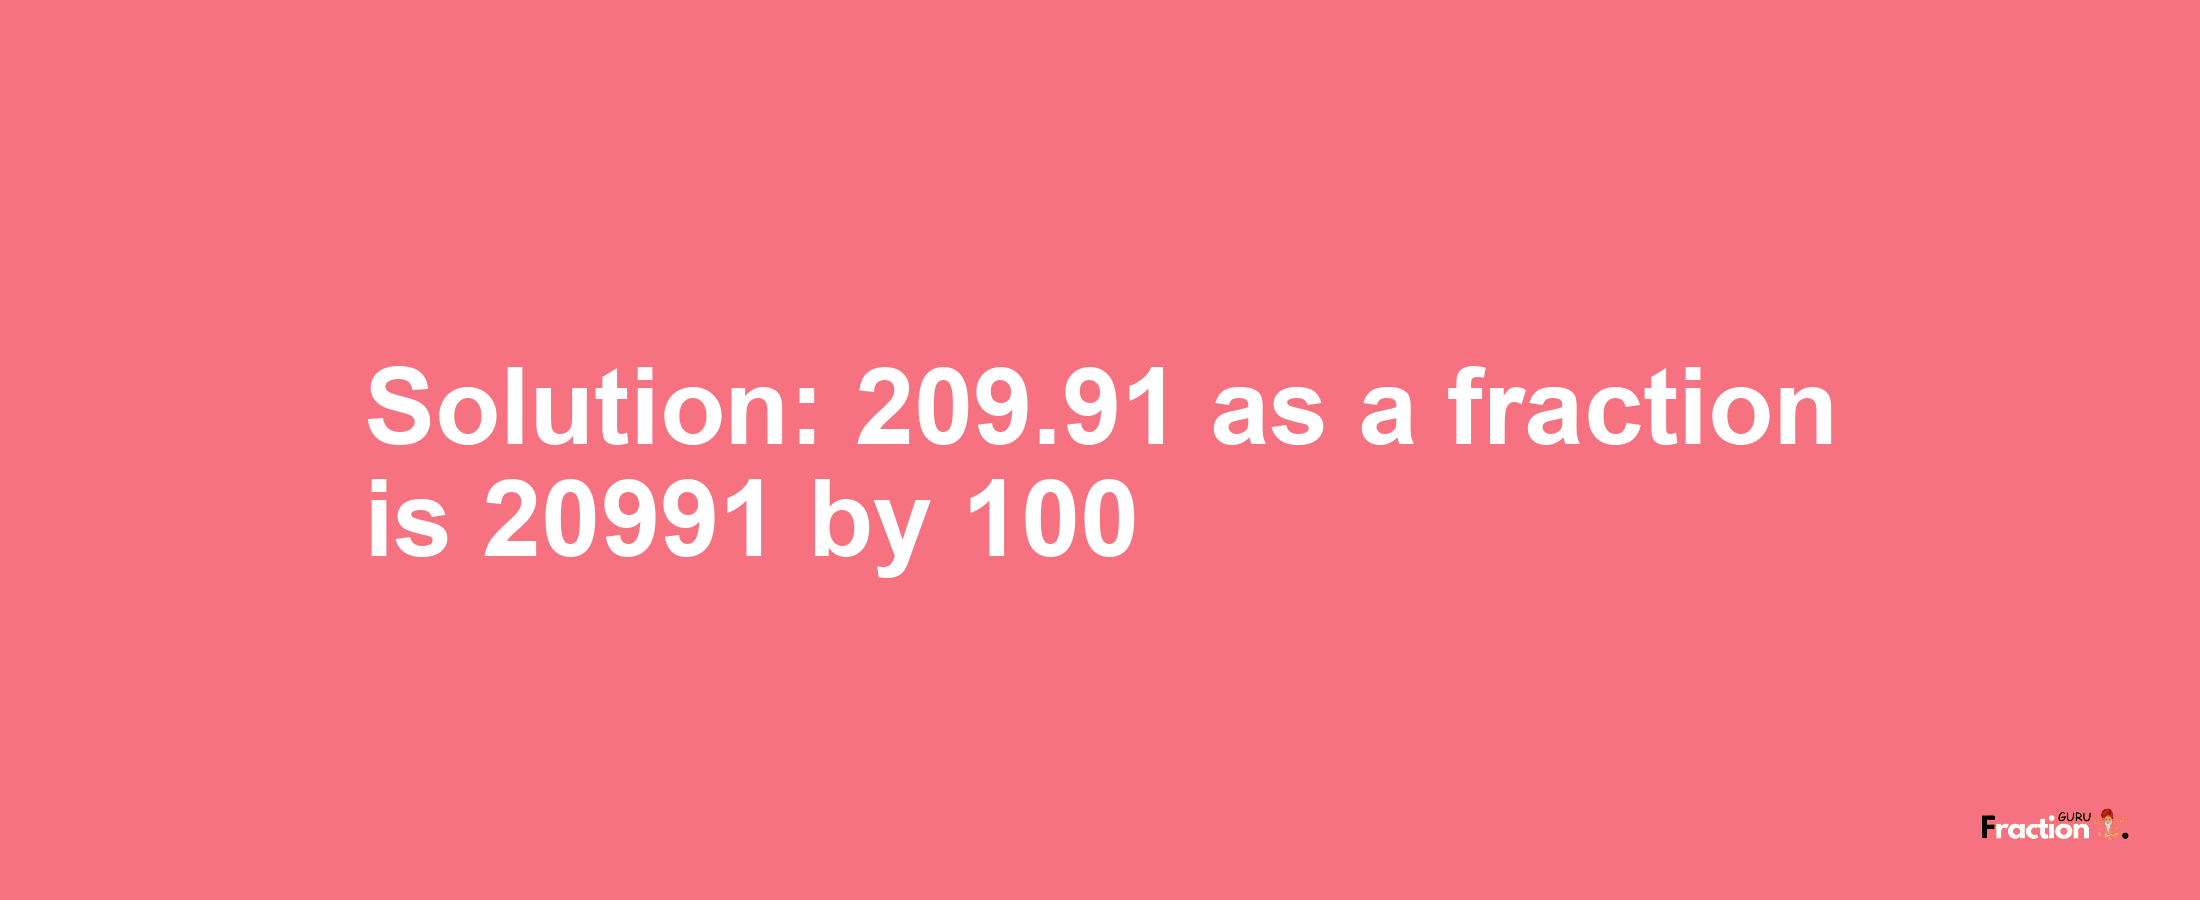 Solution:209.91 as a fraction is 20991/100